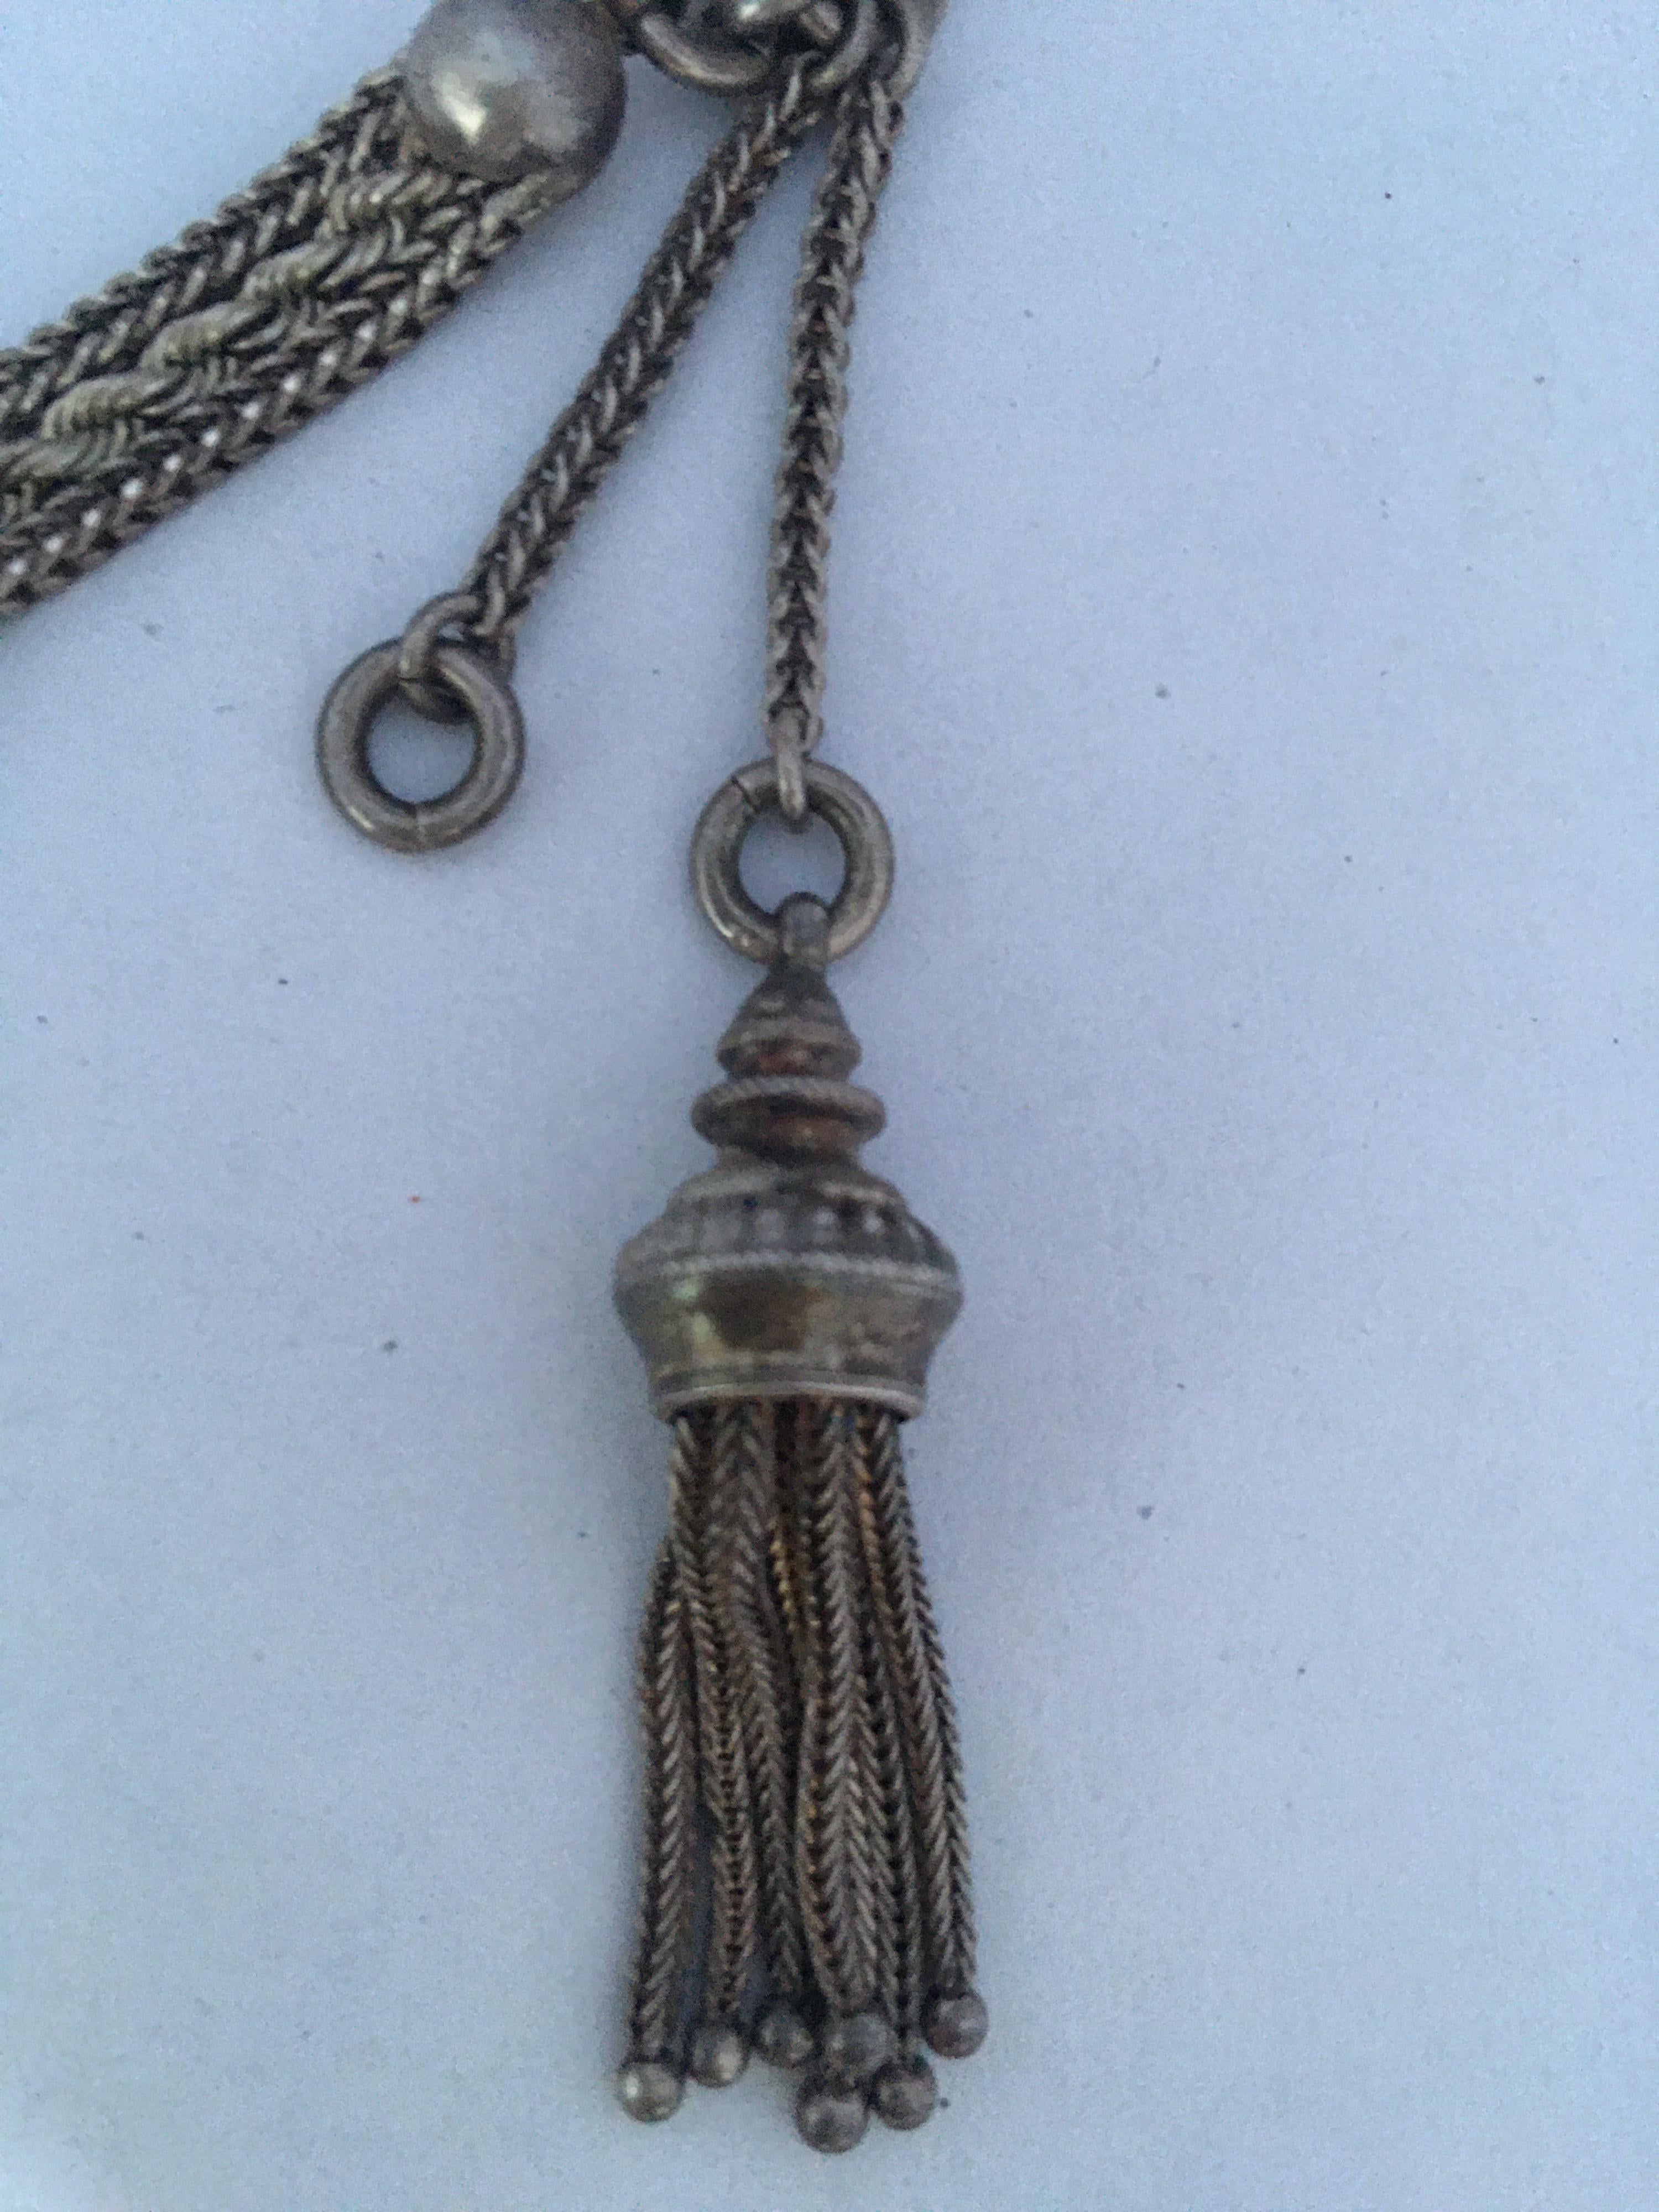 Antique Silver Ornate Pocket Watch Chain 2